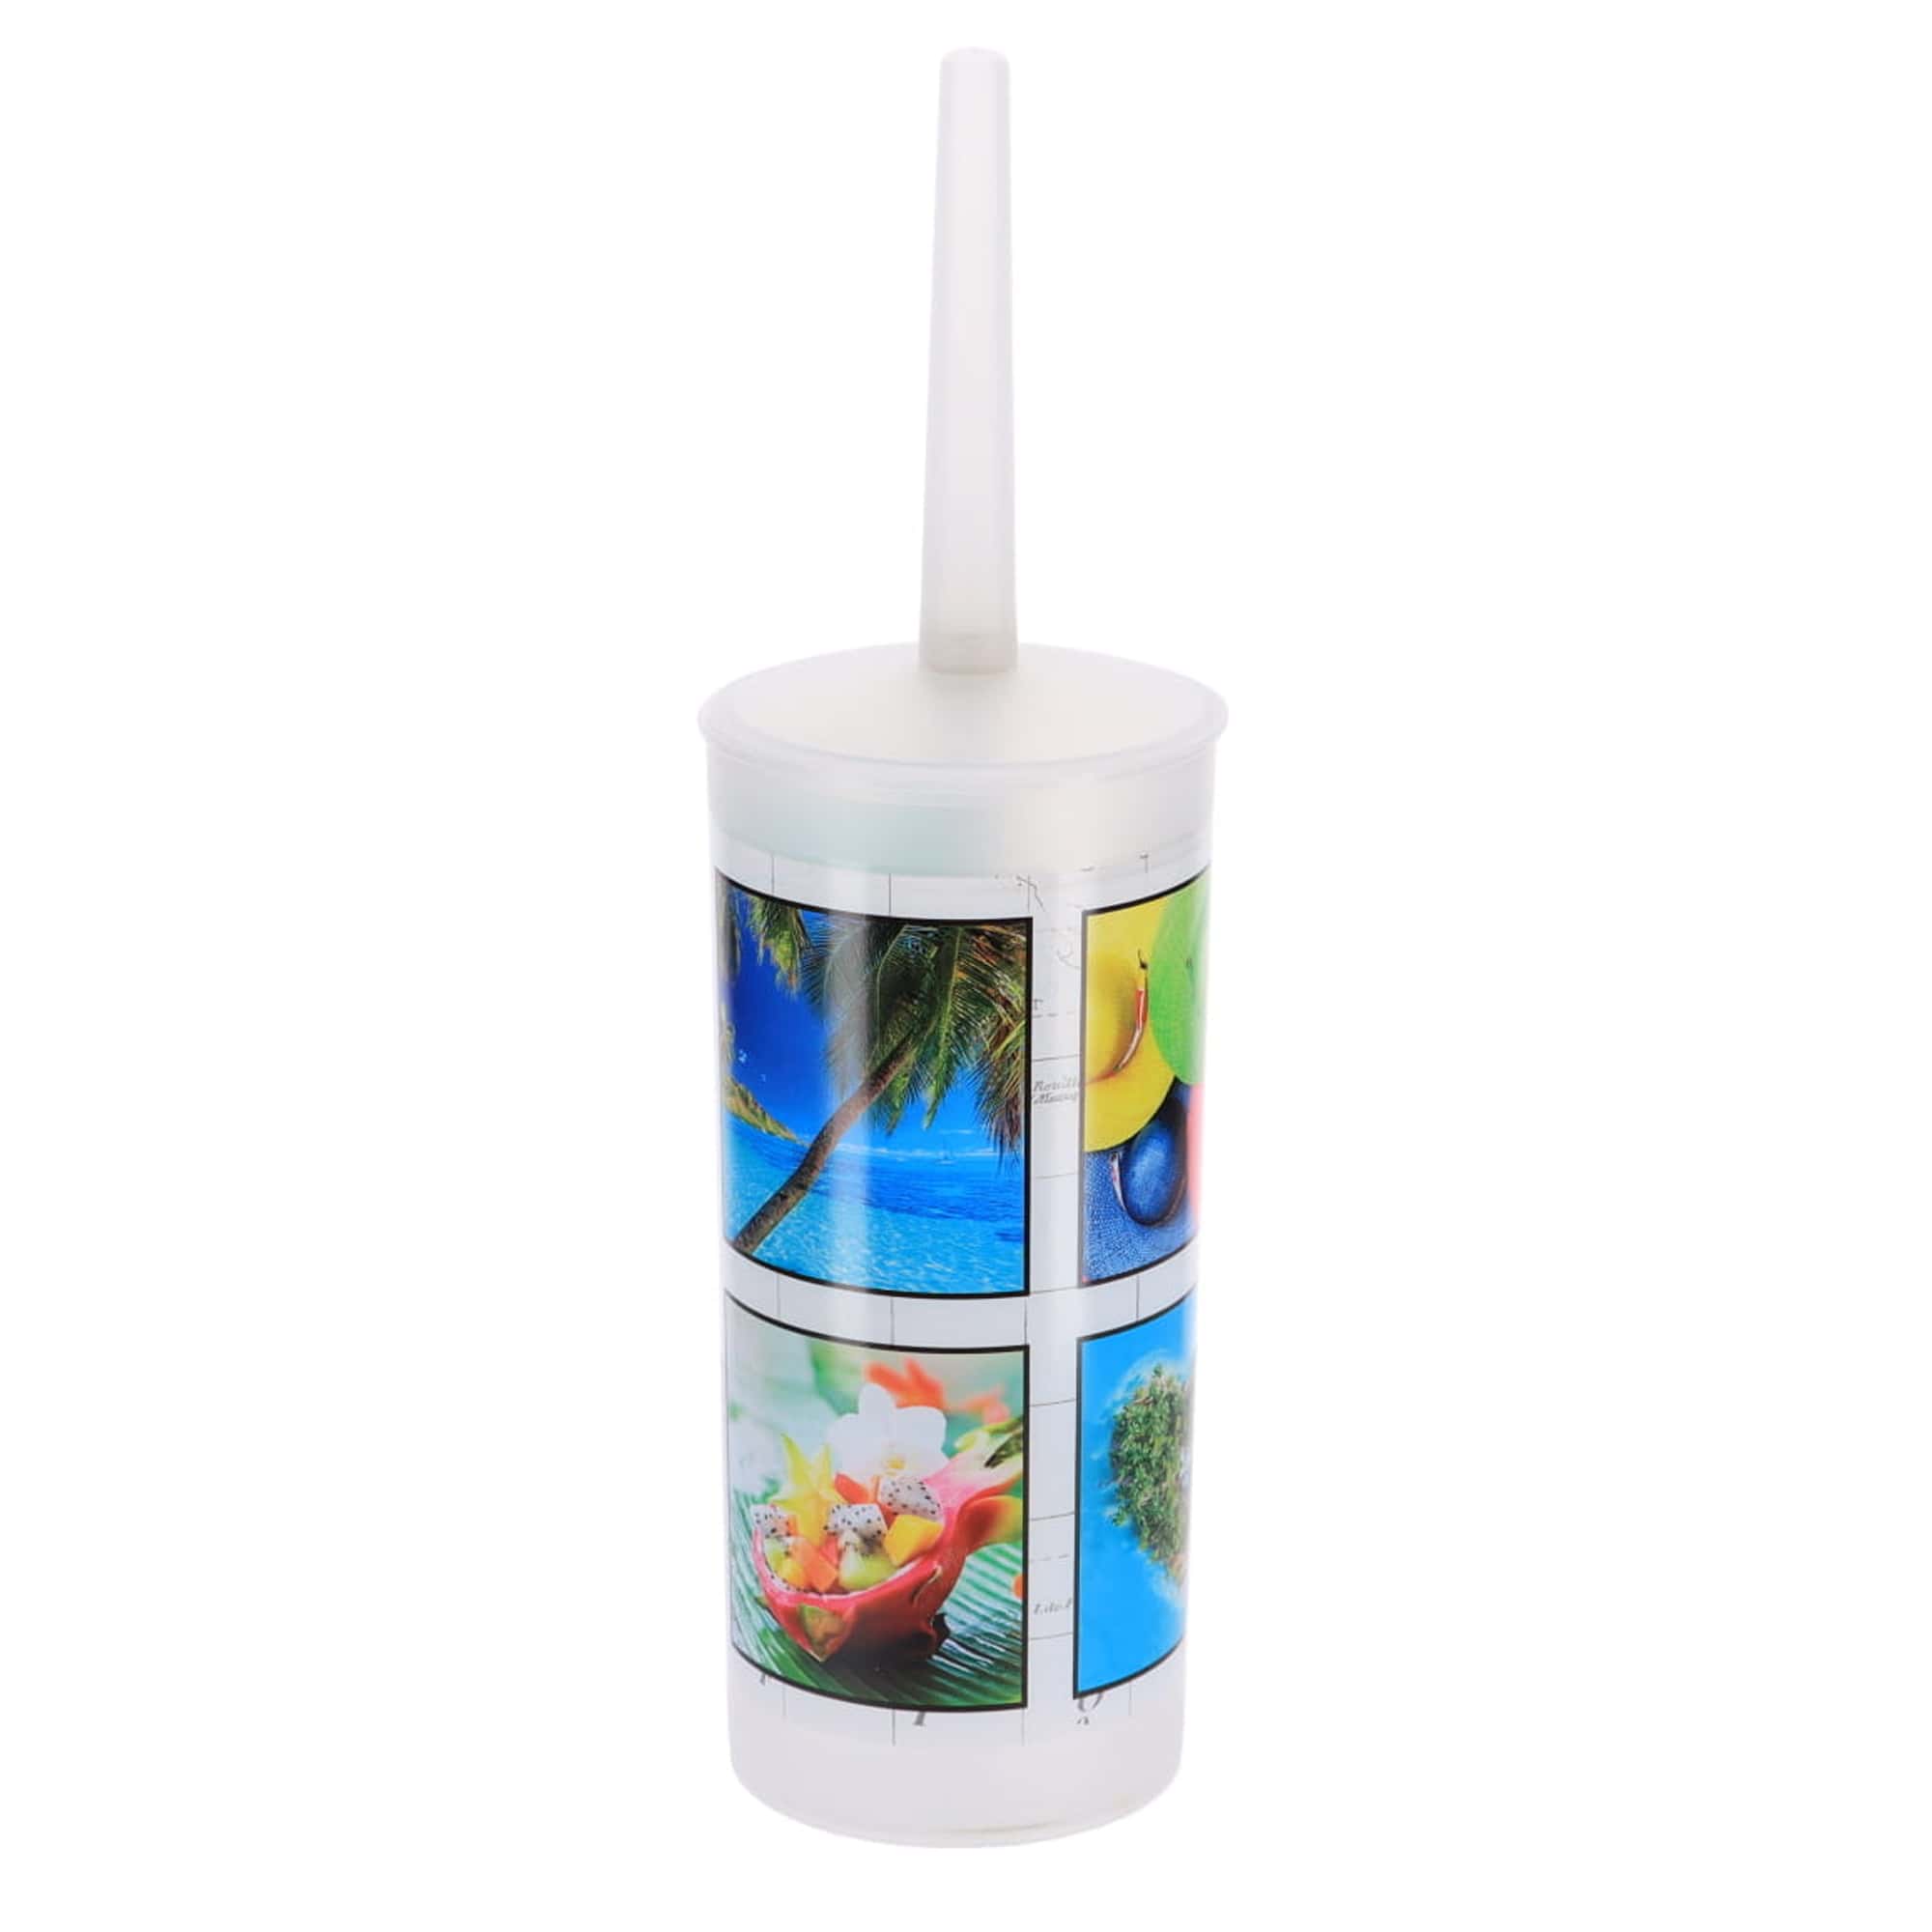 decorative plastic toilet brush and holder with island pictures